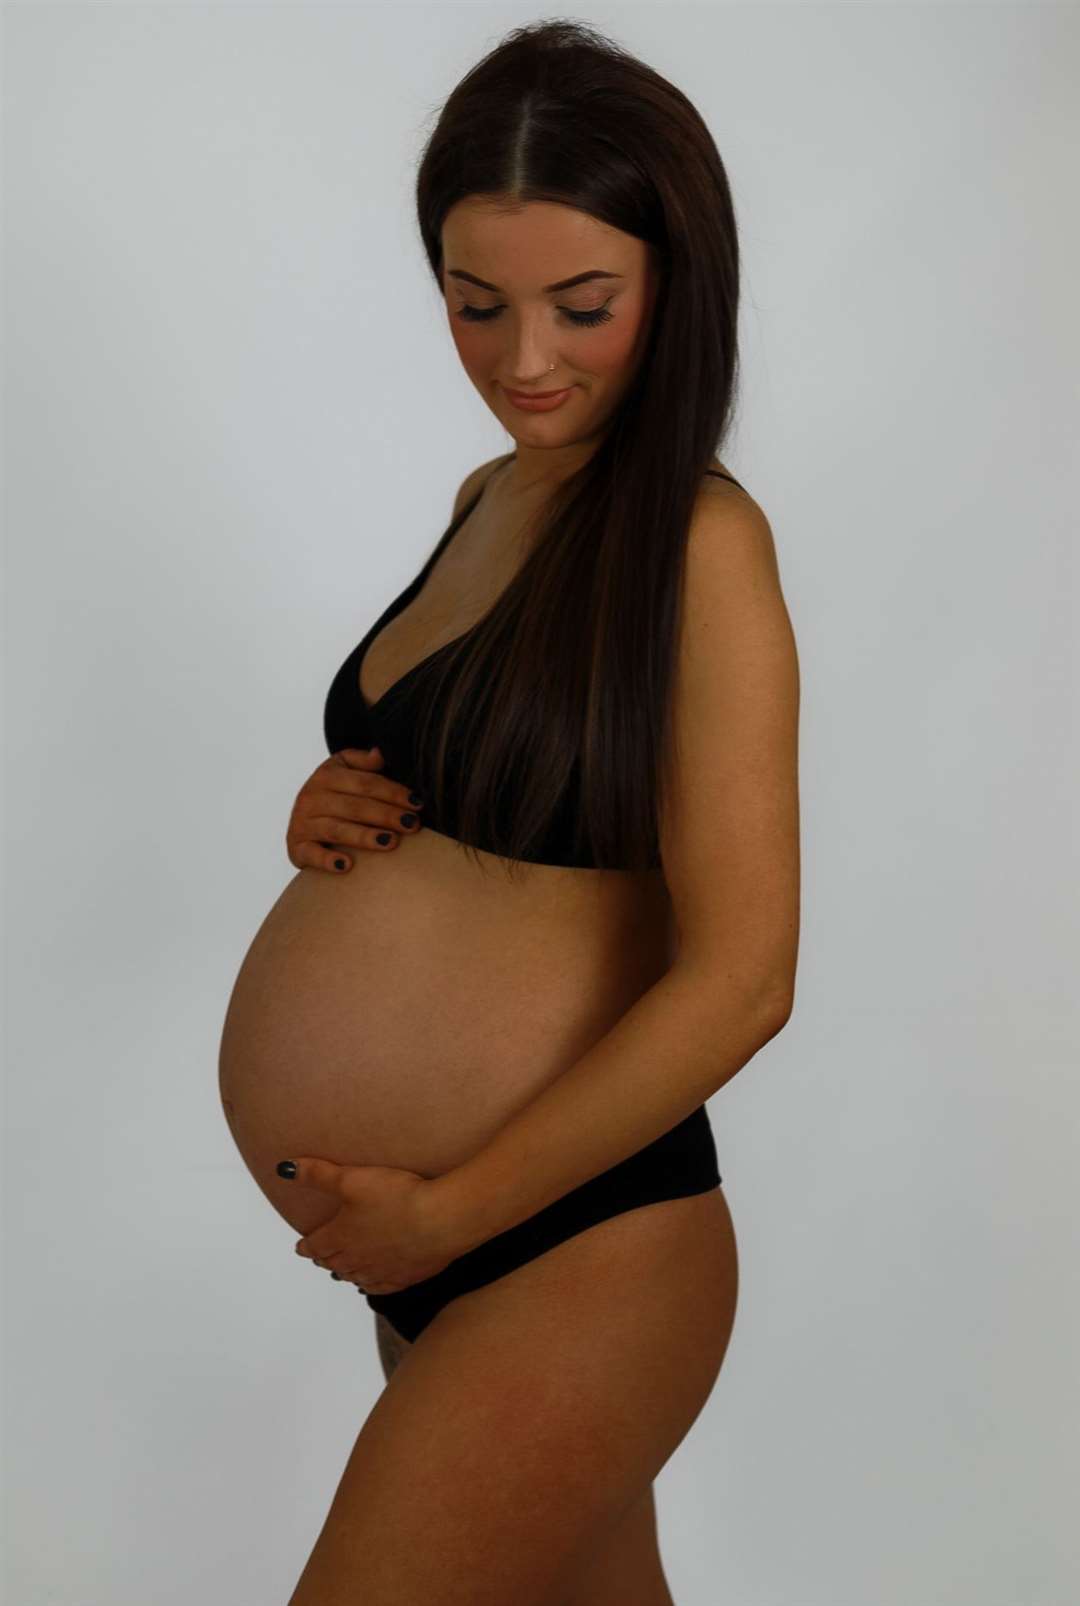 Mum-to-be Kelsey Gibbs was among those who took part in the shoot in Herne Bay. Picture: Jemma Amos